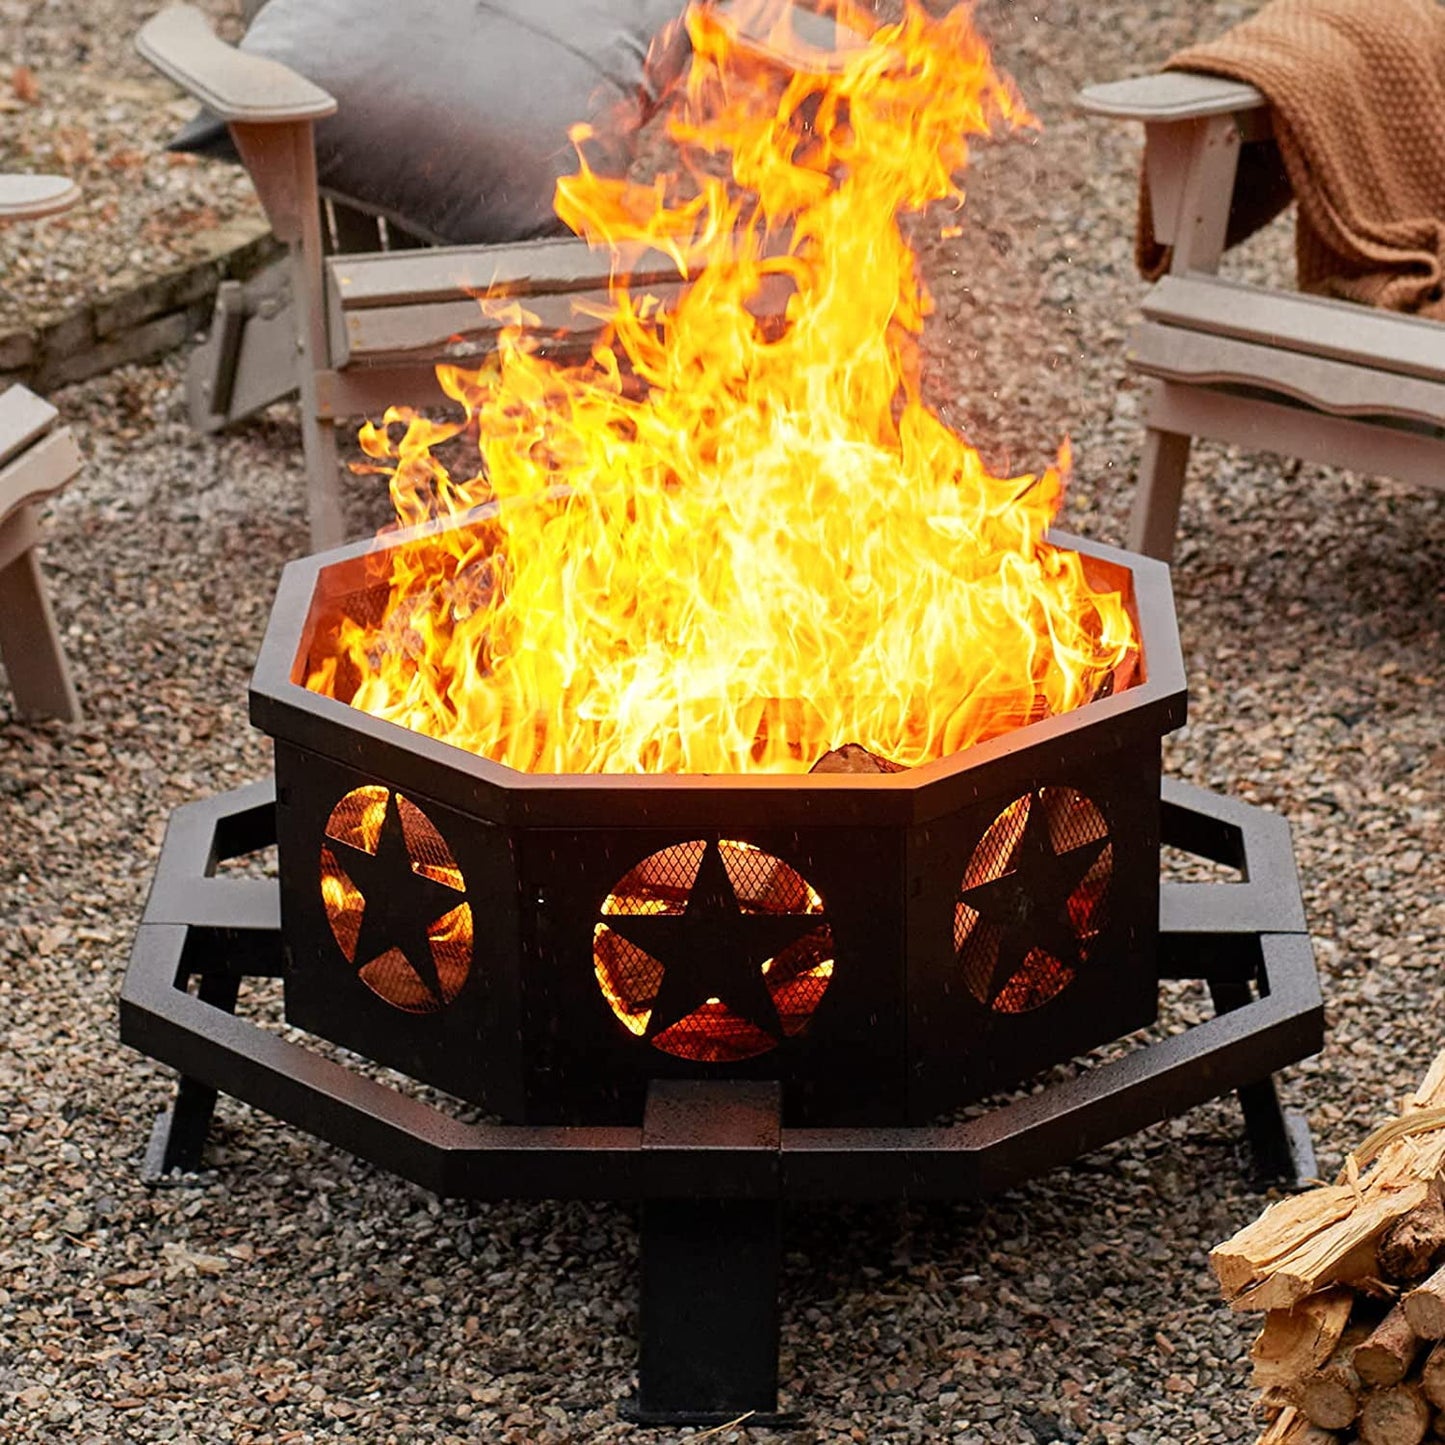 Fissfire 35 inch Fire Pit, Outdoor Wood Burning Fire Pit